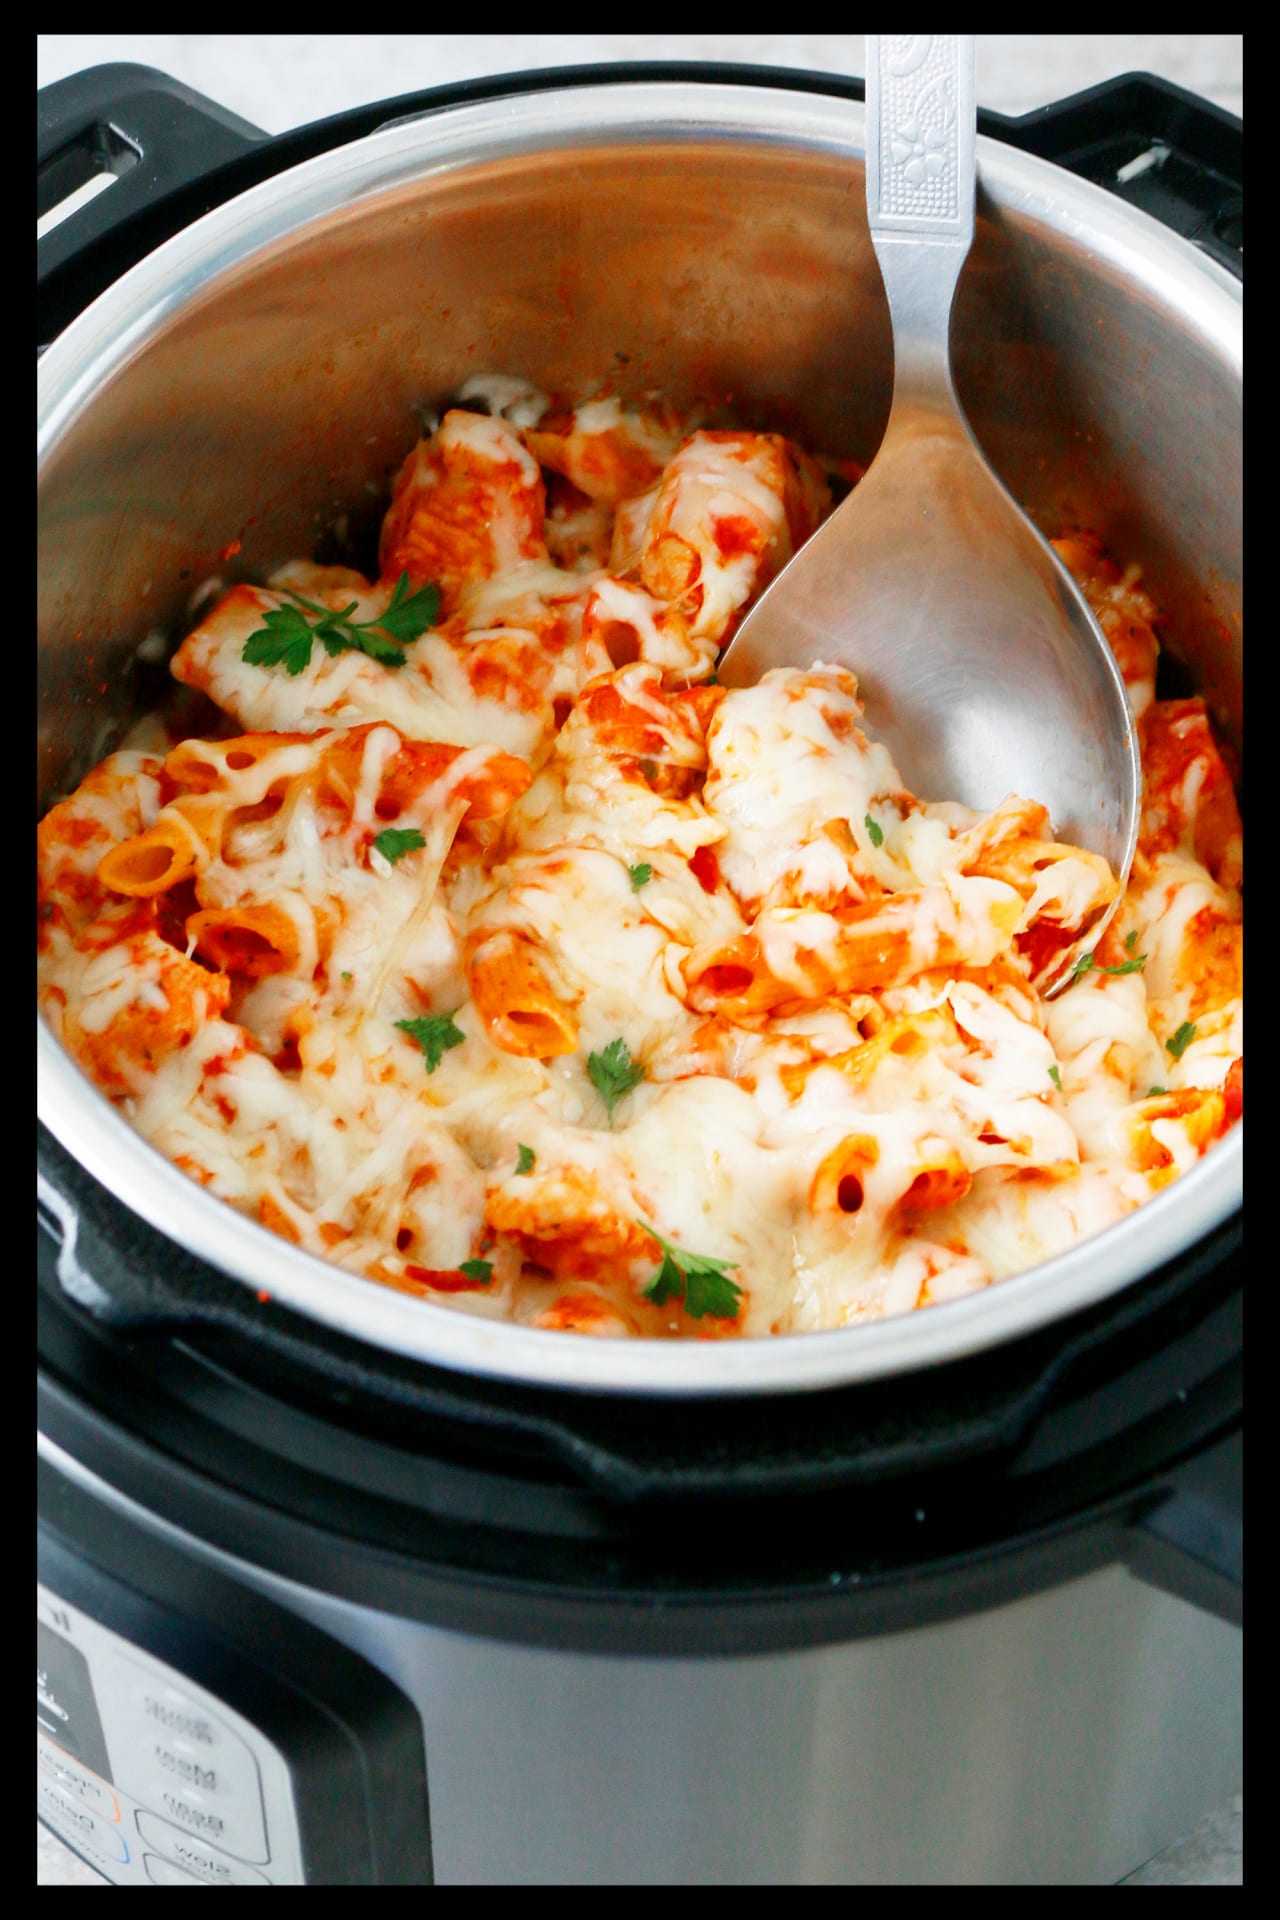 Instant Pot Chicken Recipes For Easy Weeknight Dinners - super simple one pot 30 minute easy meals when your need simply weeknight dinners ideas - Instant Pot pressure cooker chicken parmesan and pasta with noodles cooked in your Instant Pot too - great party food, potluck food ideas and family reunion dinner food too